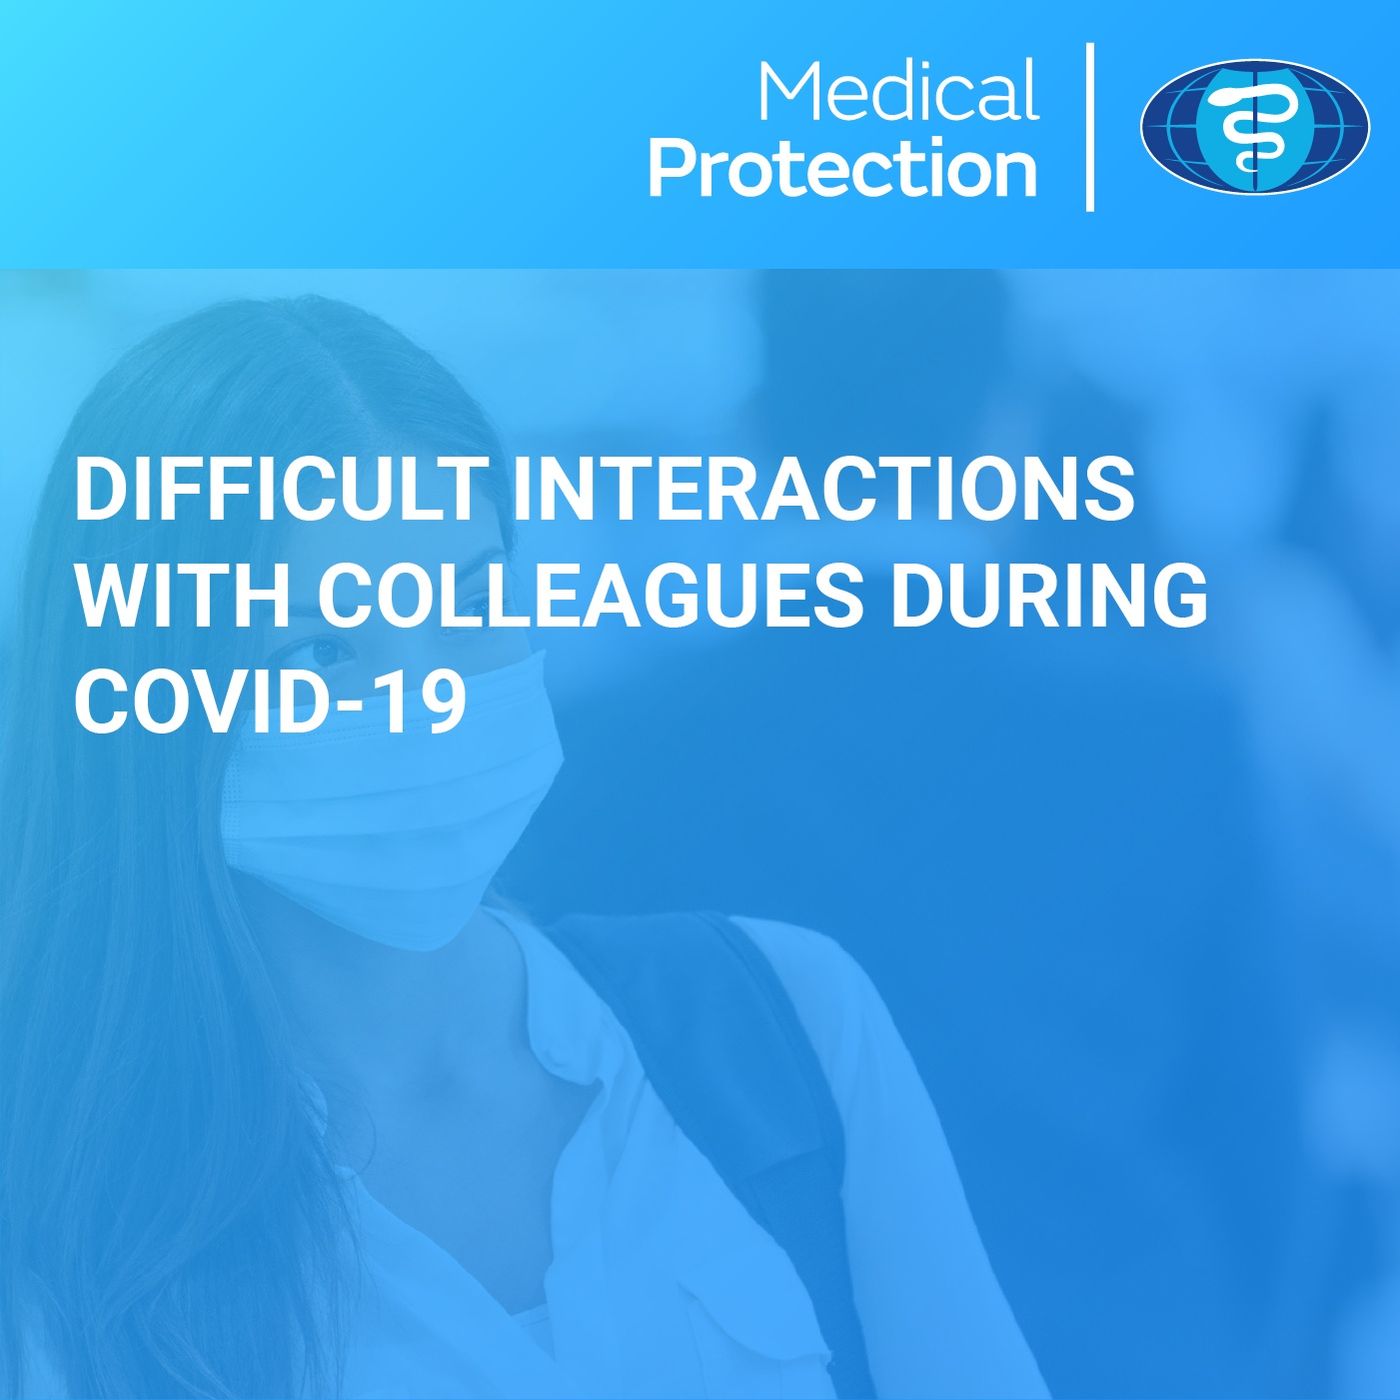 Difficult Interactions with Colleagues during COVID-19